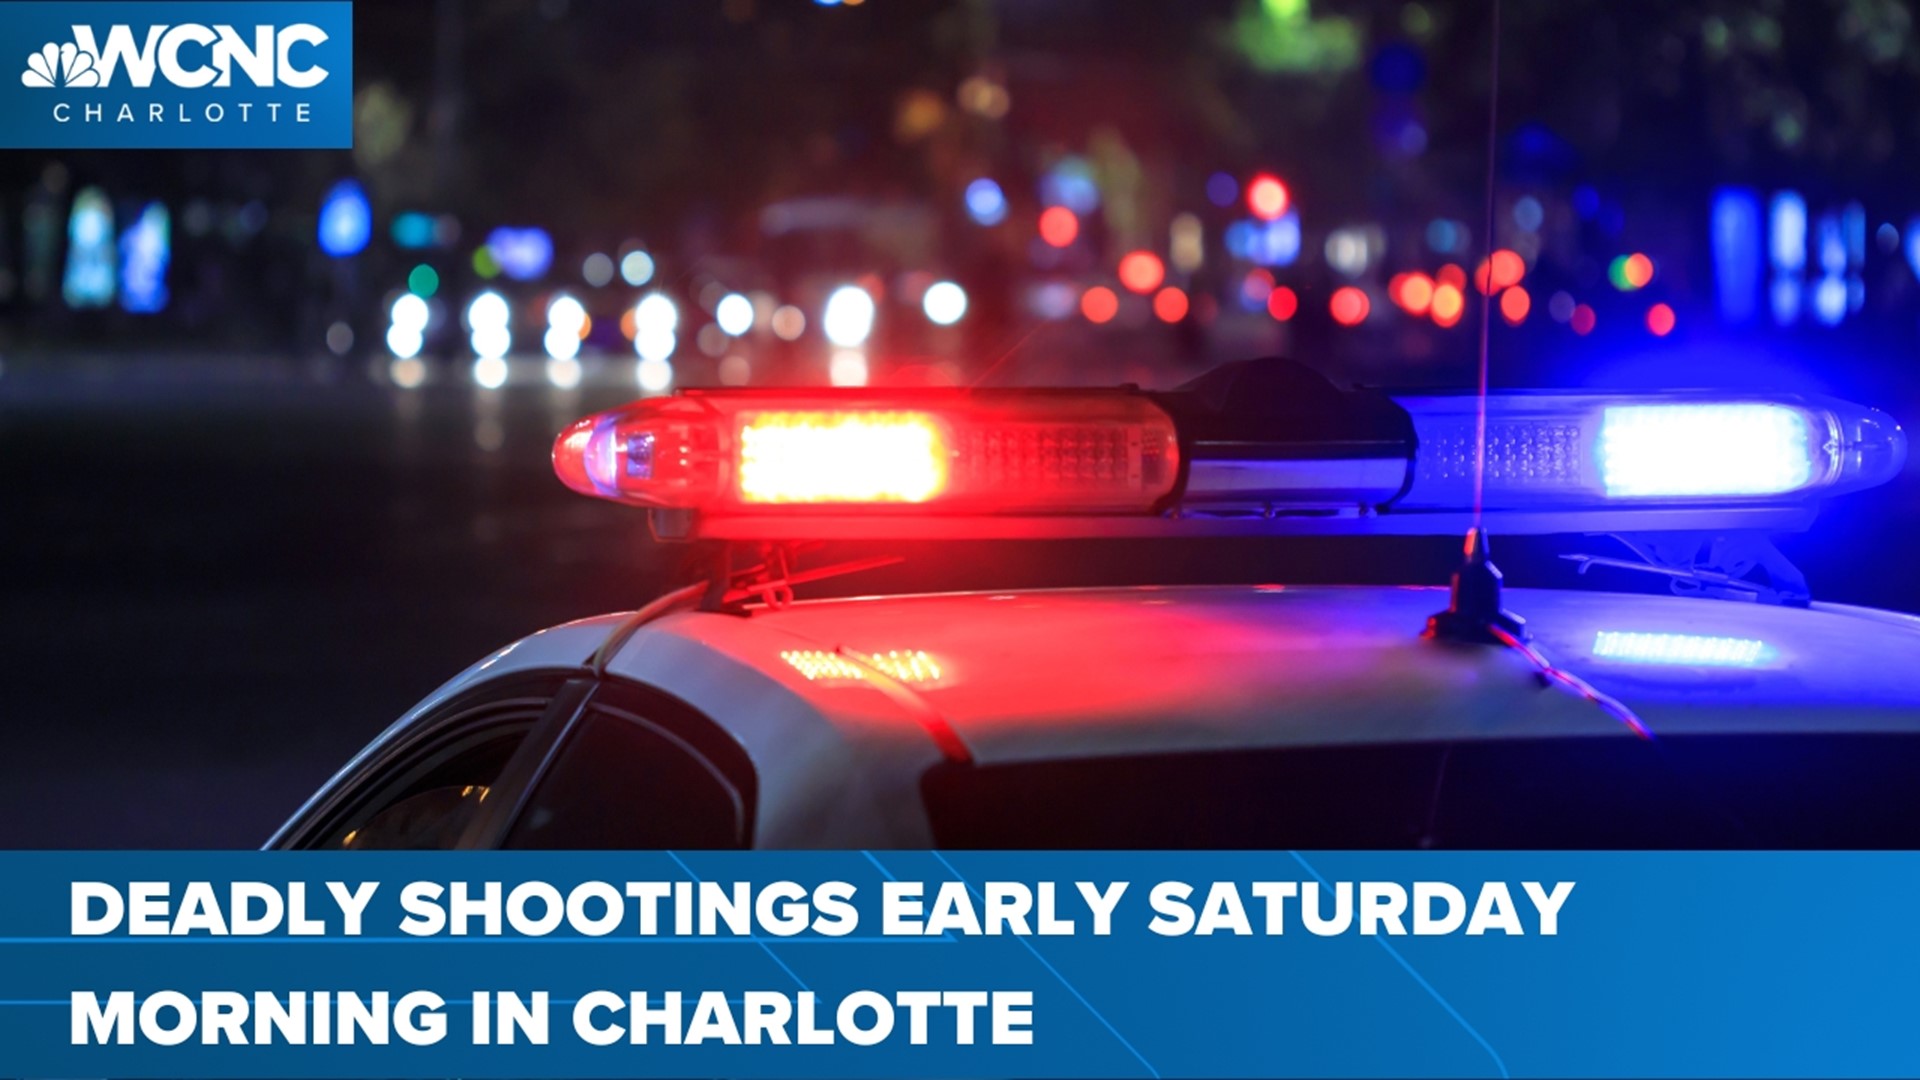 Three separate deadly shootings happened early Saturday morning in Charlotte. Austin Walker has the story.